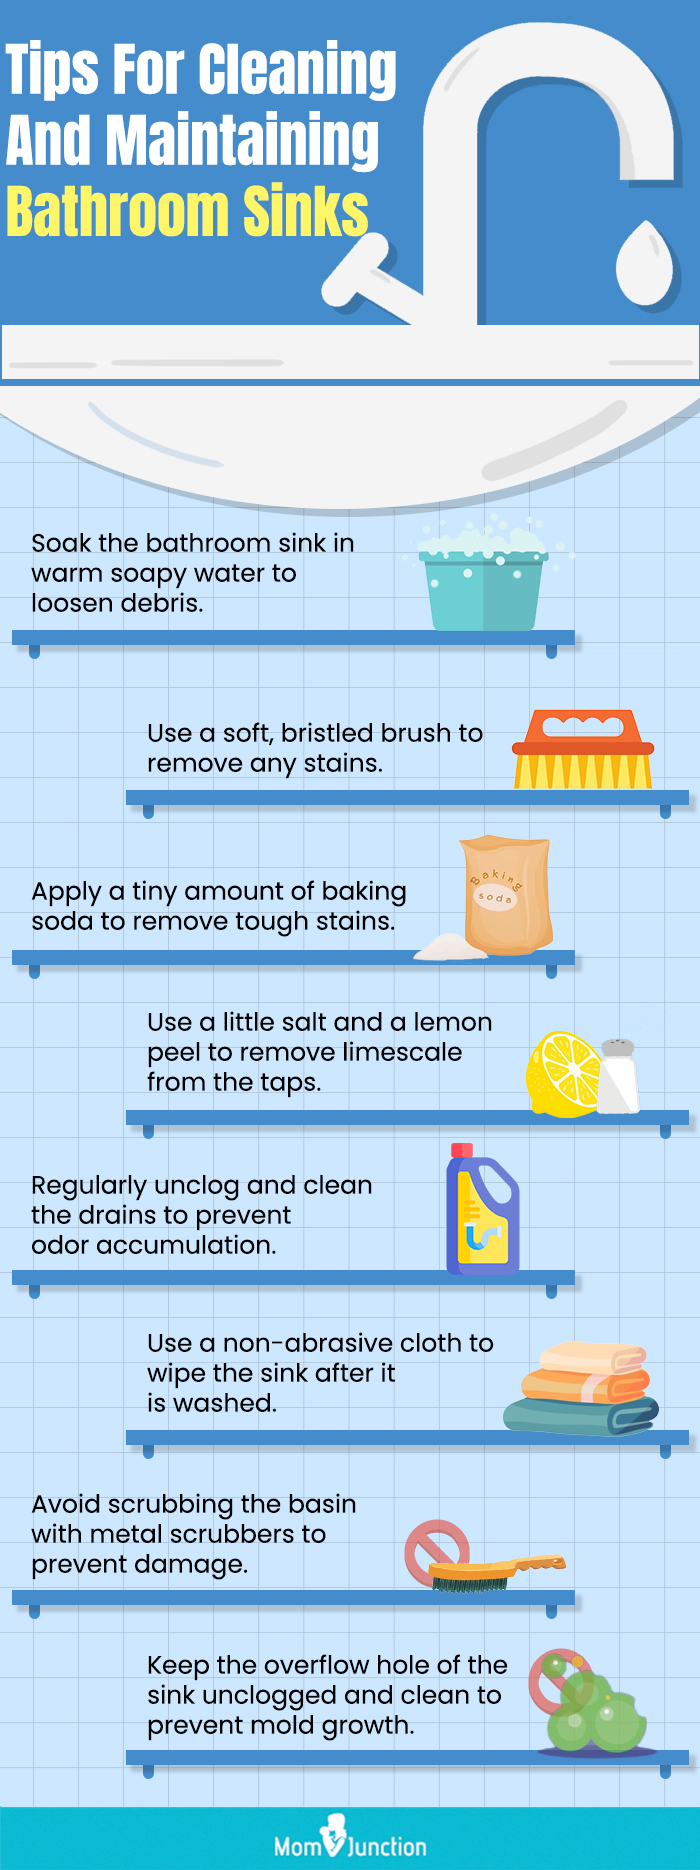 Tips For Cleaning And Maintaining Bathroom Sinks (infographic)